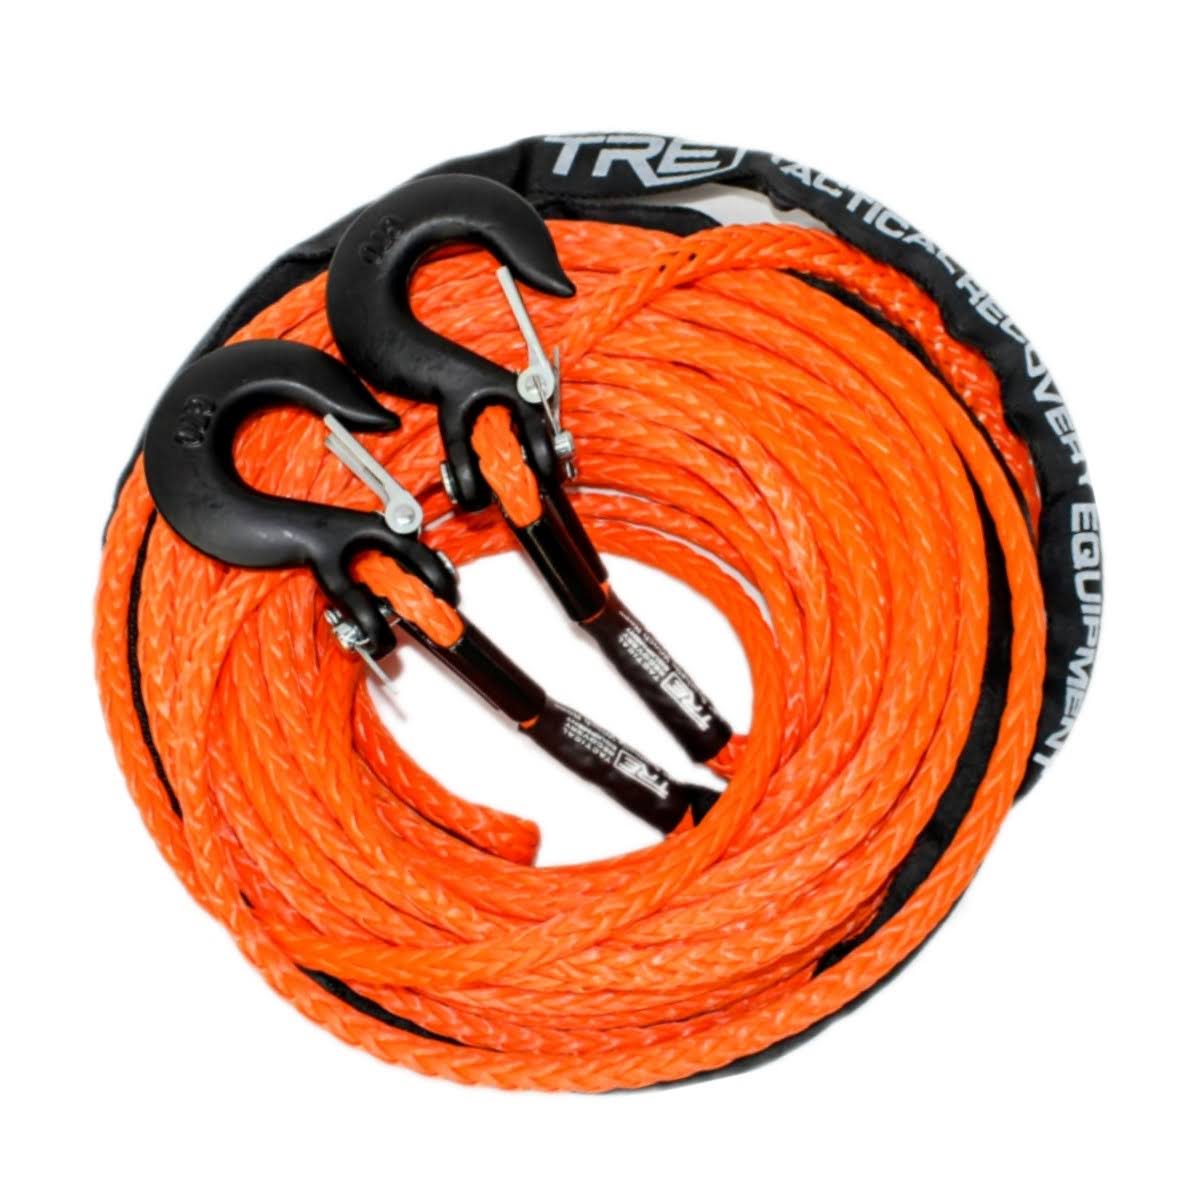 3/8 Winch Rope Extensions - 20,000 lb. Breaking Strength - Available in Many Lengths (Winch Rope Color: Silver, Winch Rope Length: 50 ft.)